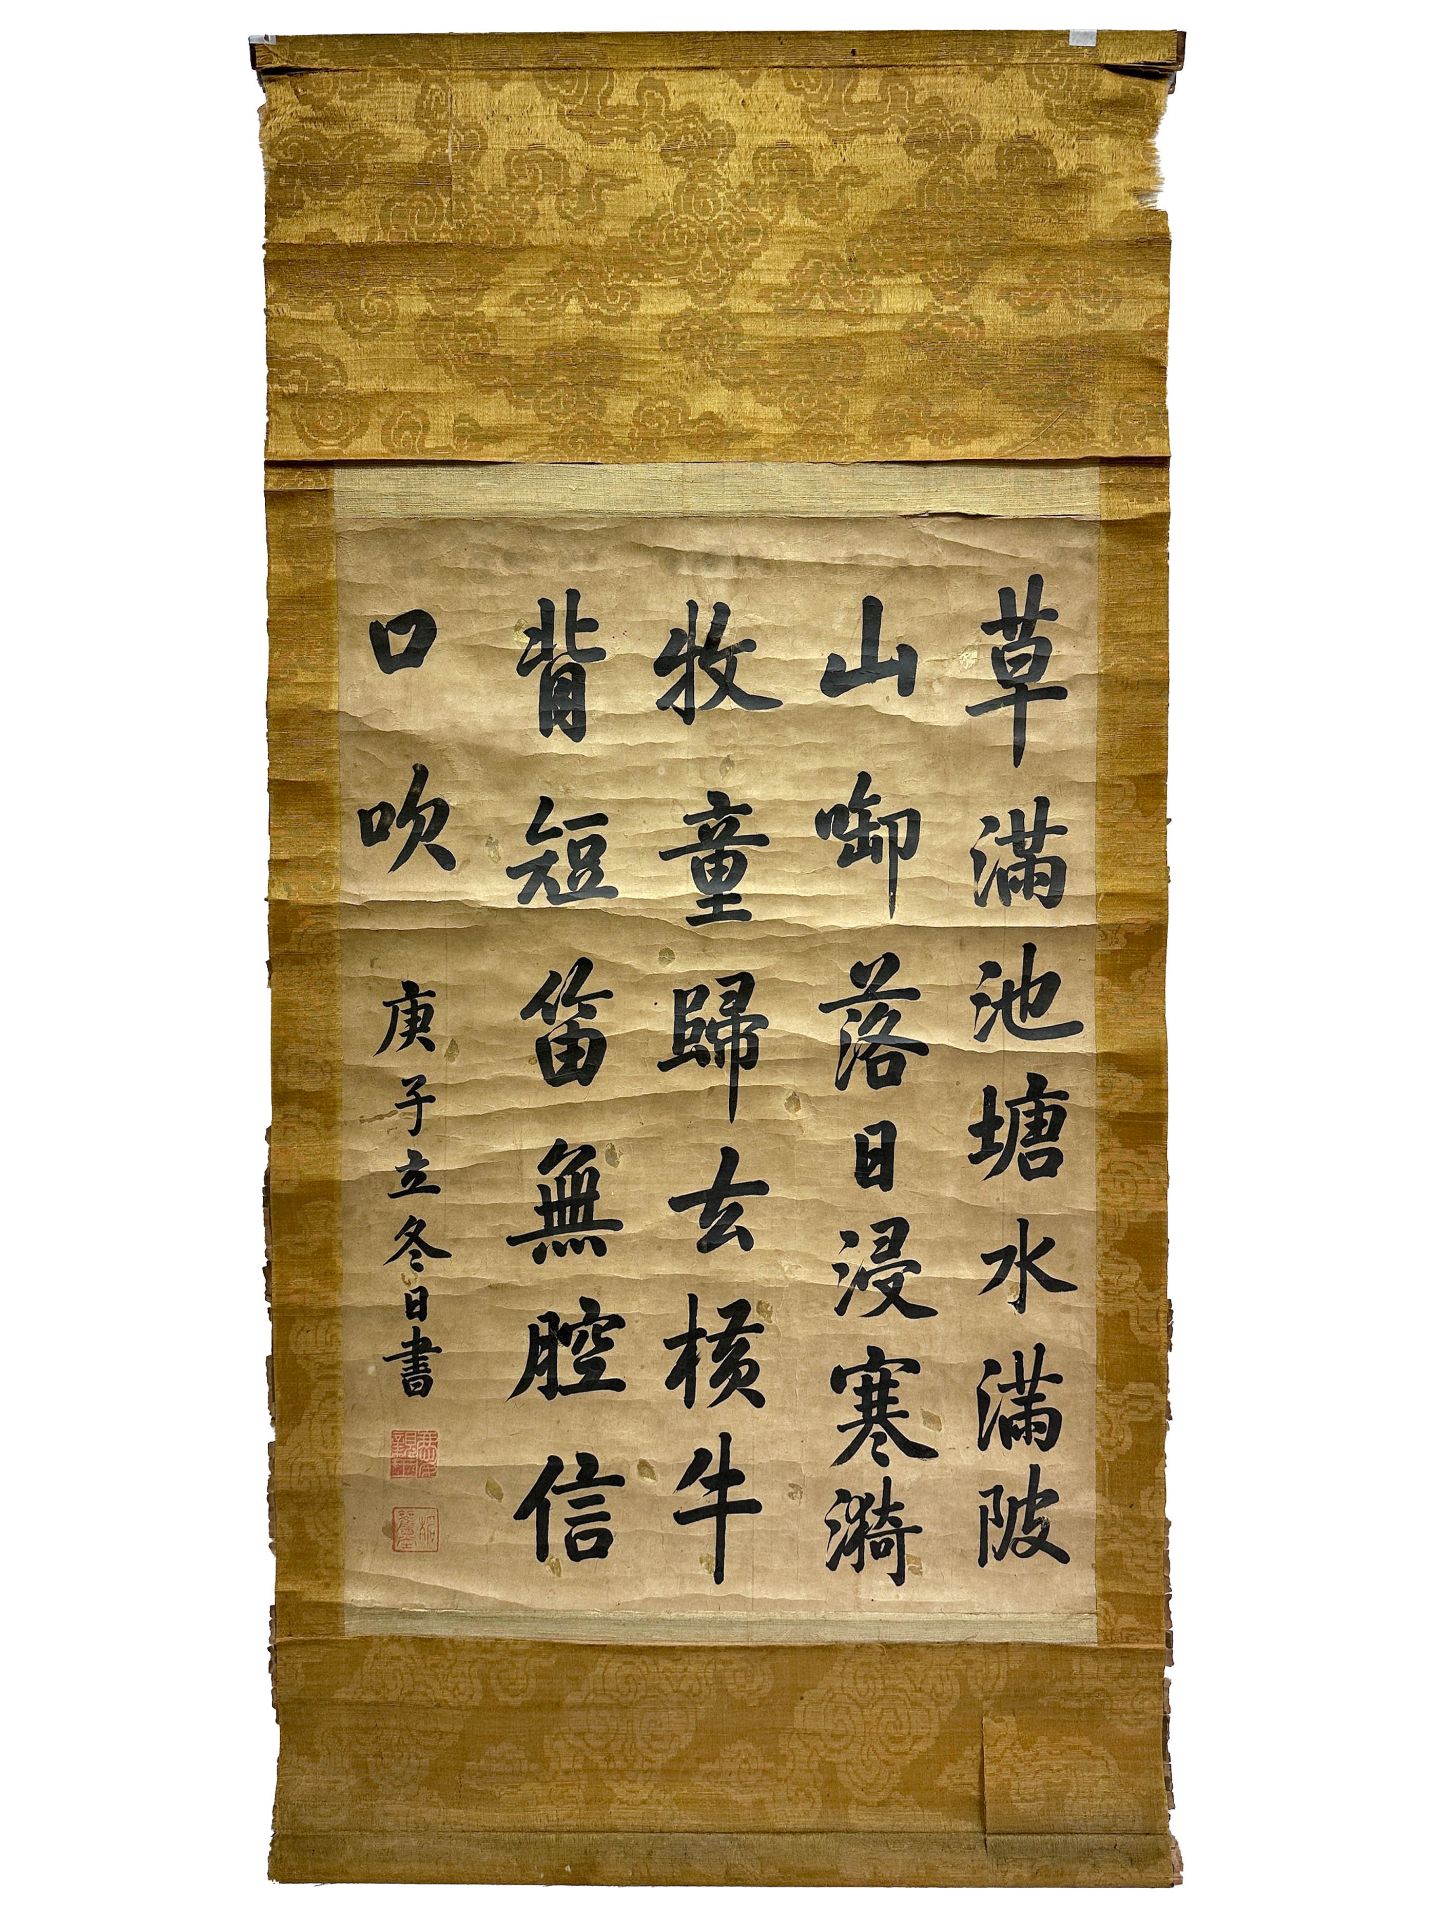 A Chinese Calligraphy by Prince Qing - Image 2 of 9